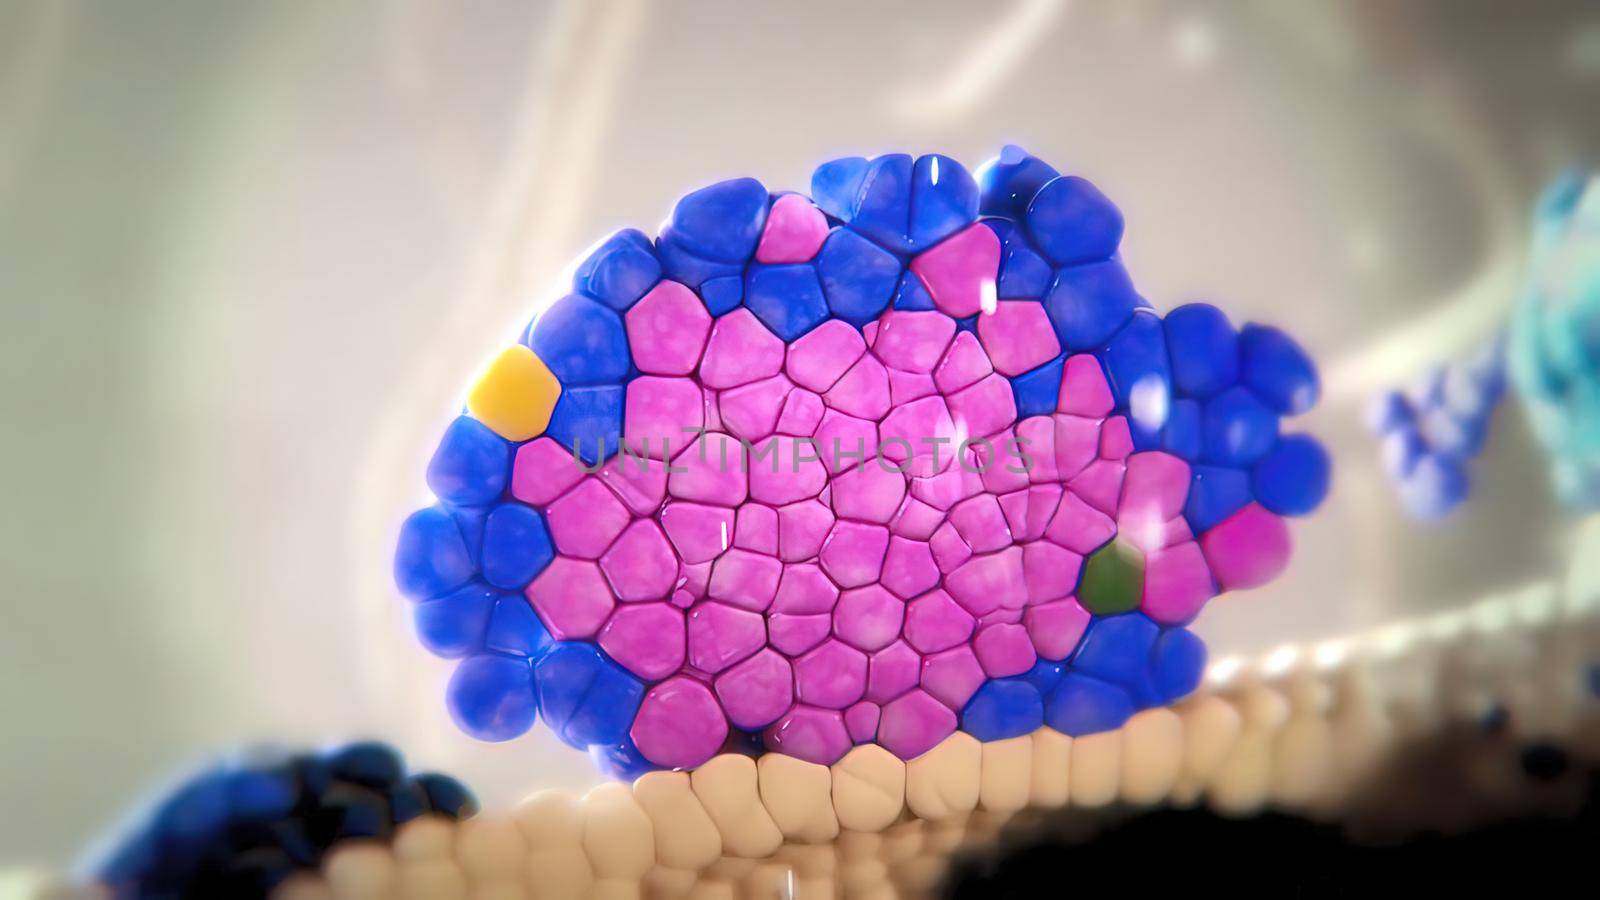 Pancreatic islet cells are the main source of insulin and glucagon, which are produced by cells and cells, respectively. 3D illustration